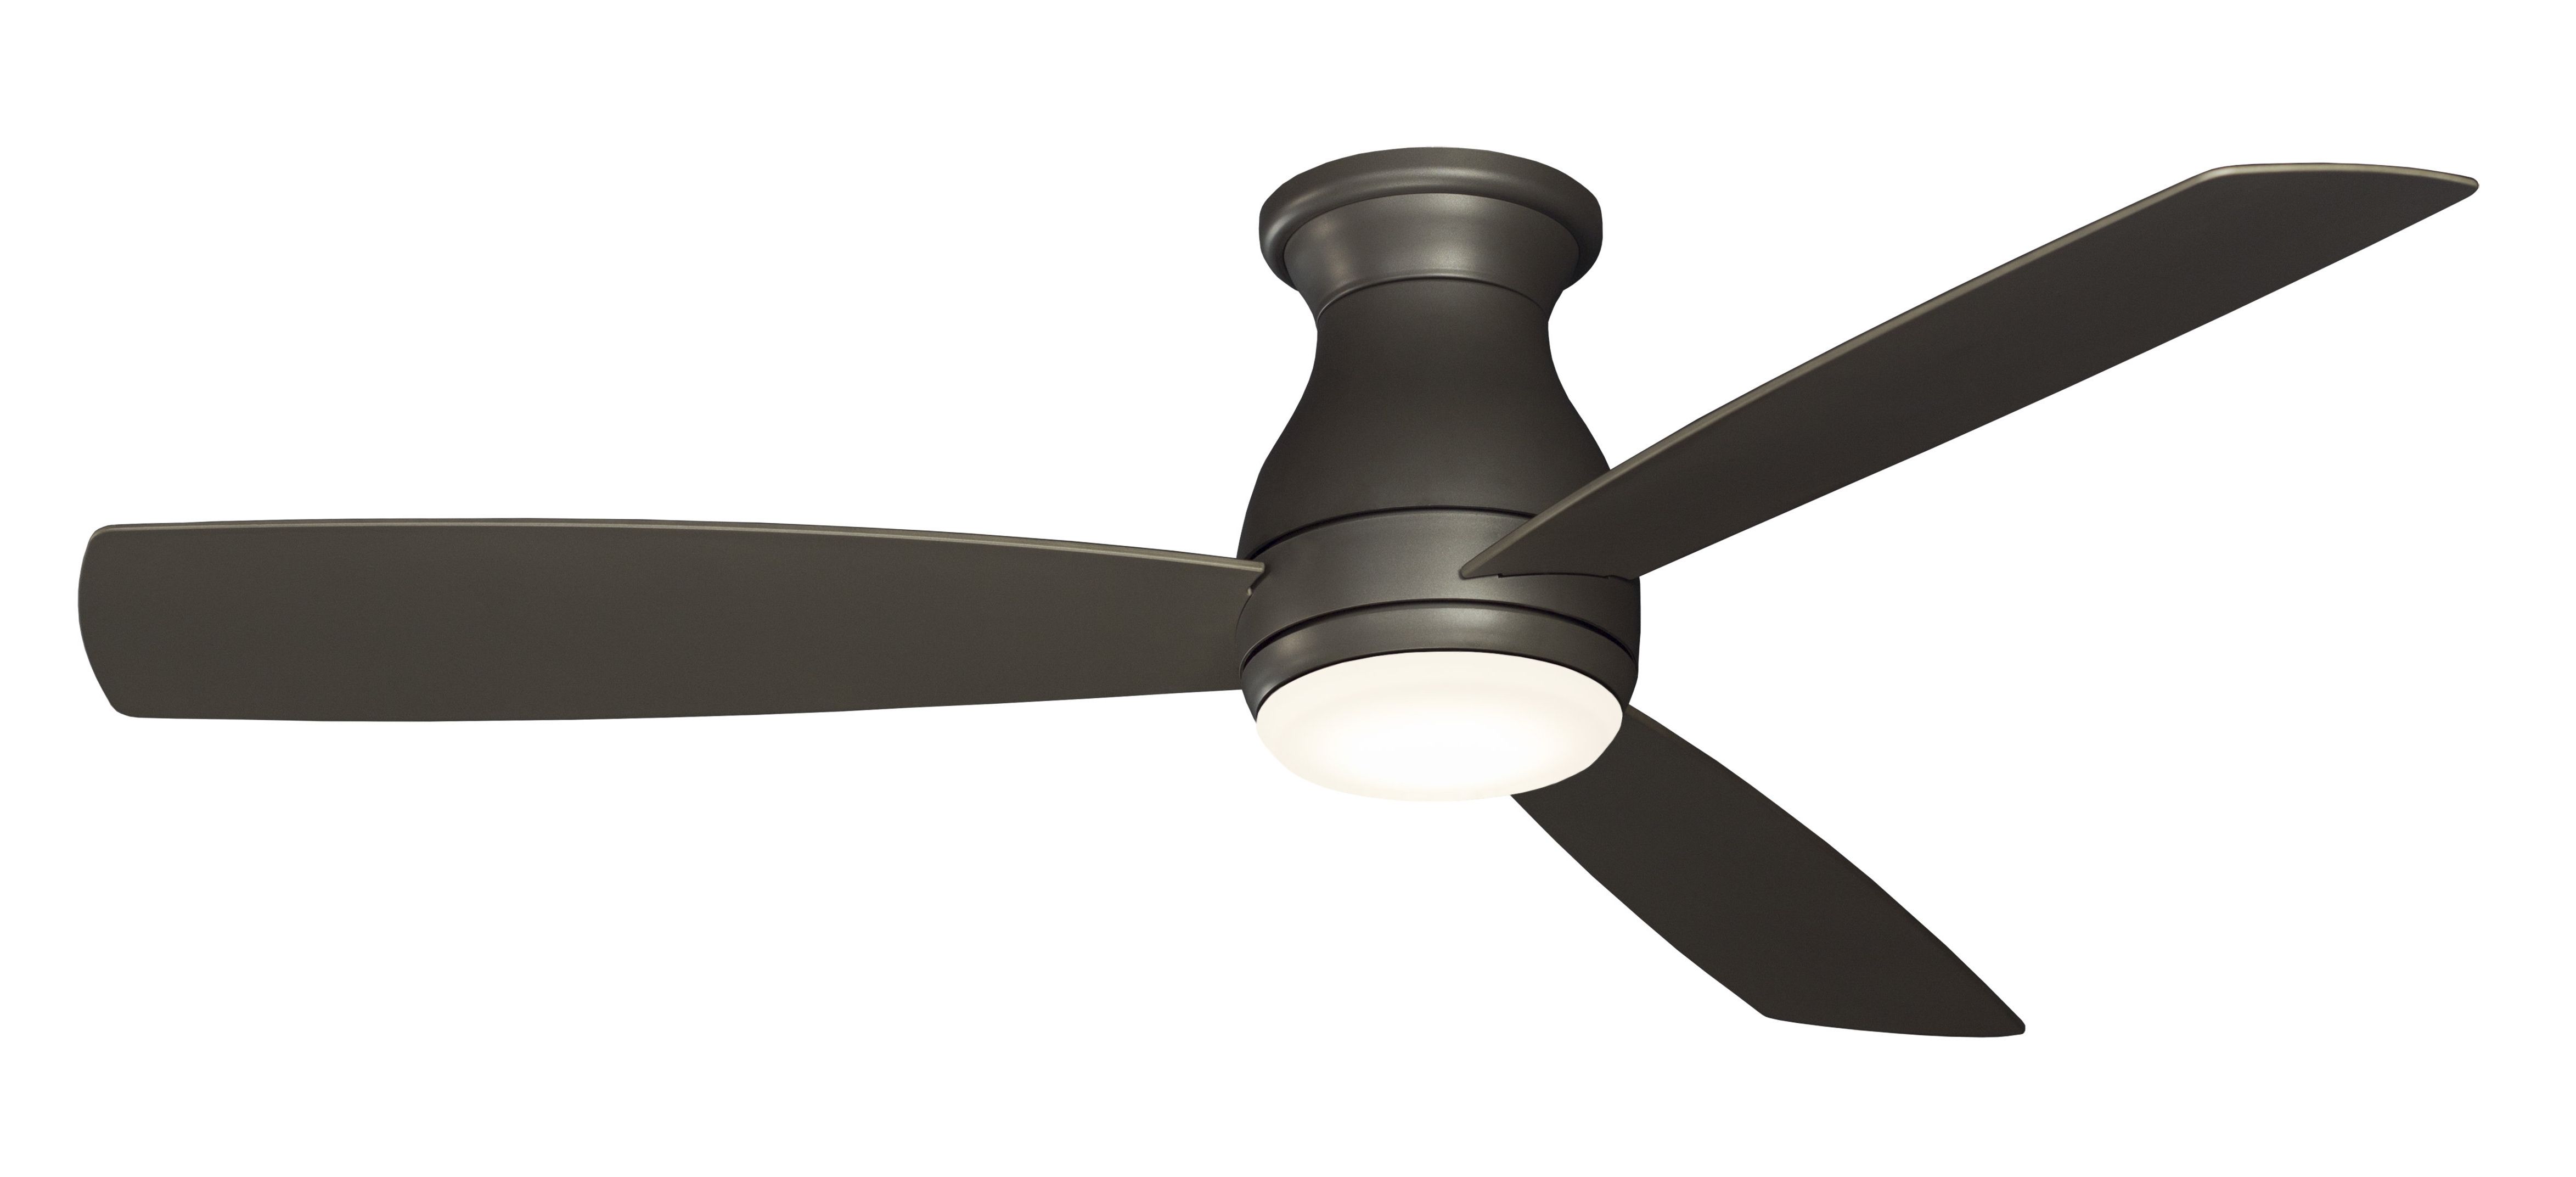 52" Hugh 3 Blade Led Ceiling Fan With Regard To Well Known Hedin 3 Blade Hugger Ceiling Fans (View 19 of 20)